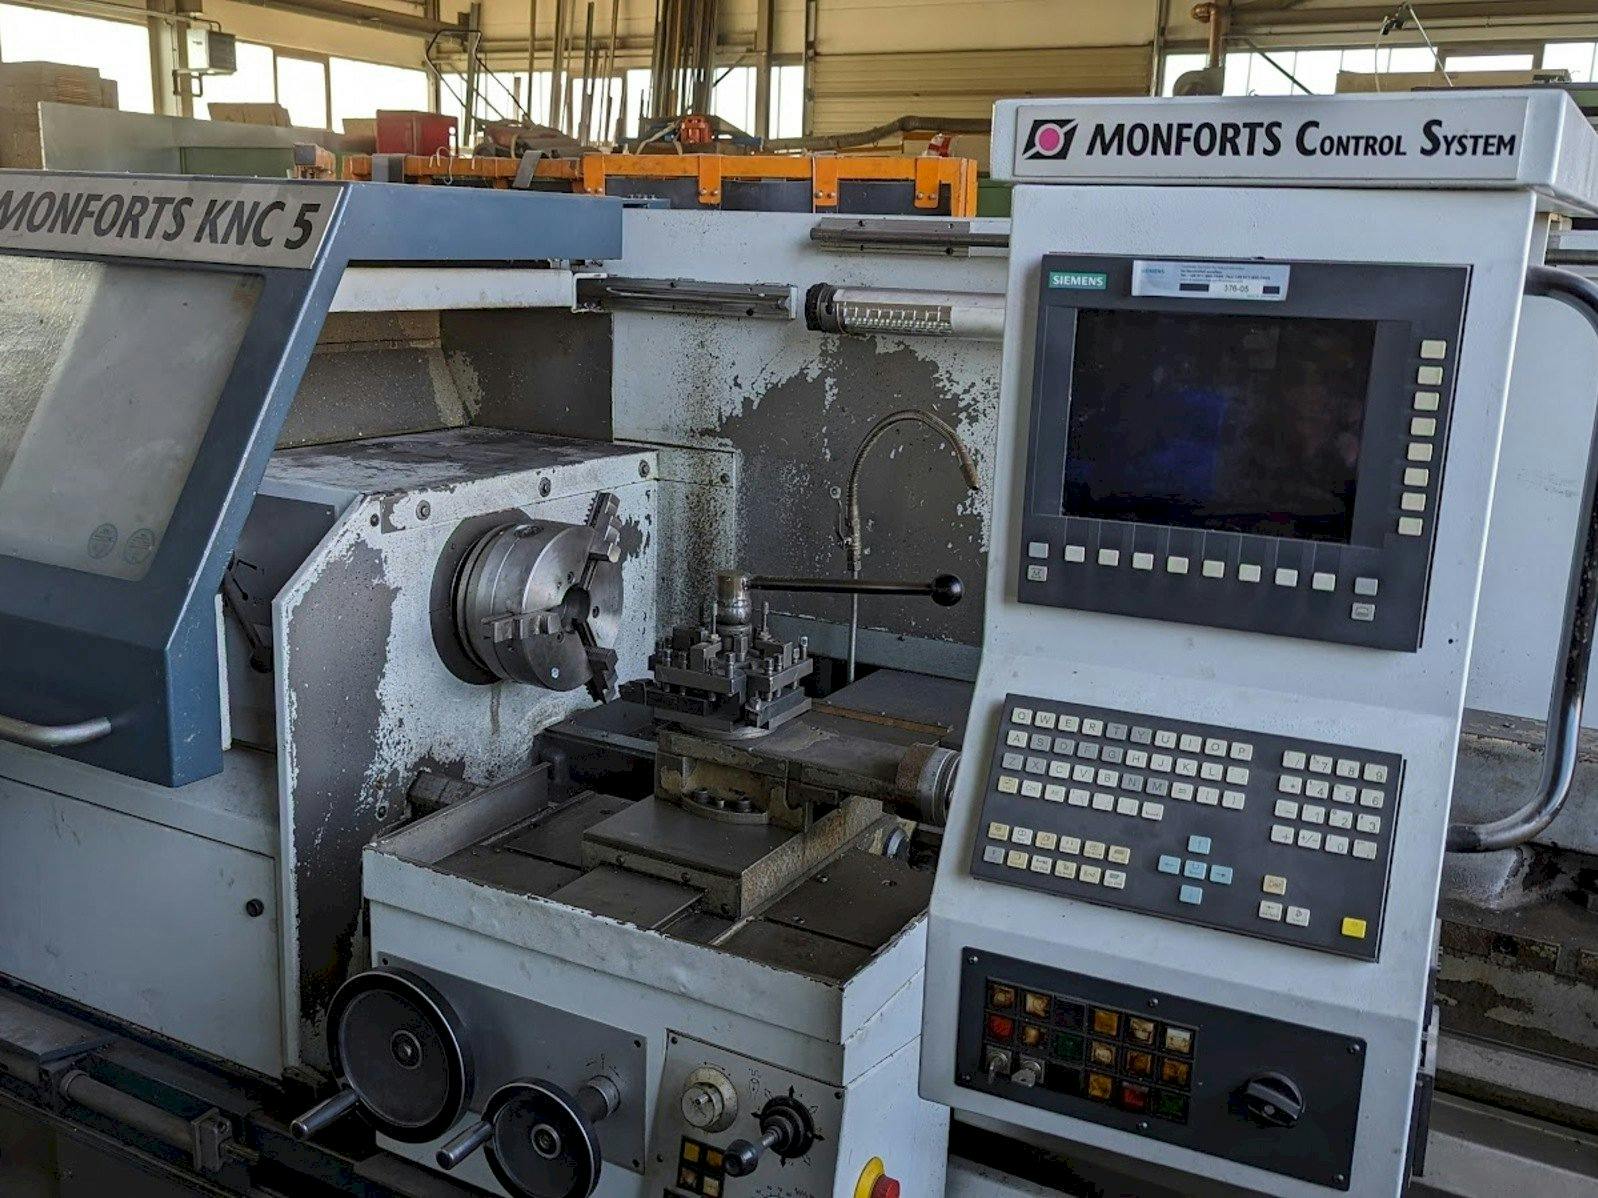 Front view of Monforts KNC 5  machine